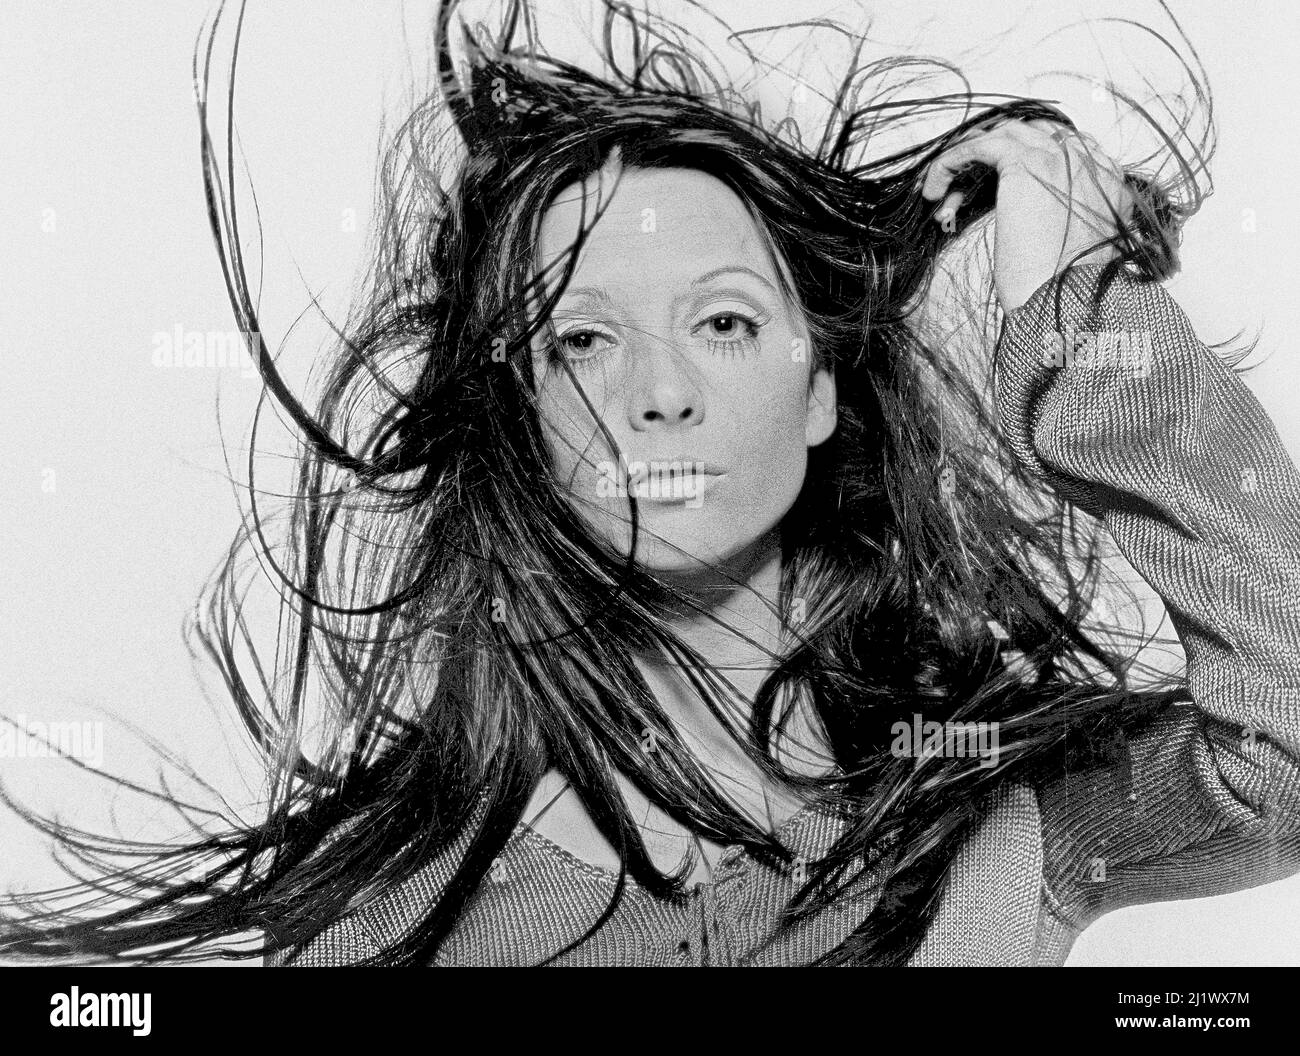 Girl with wind blown hair. Stock Photo